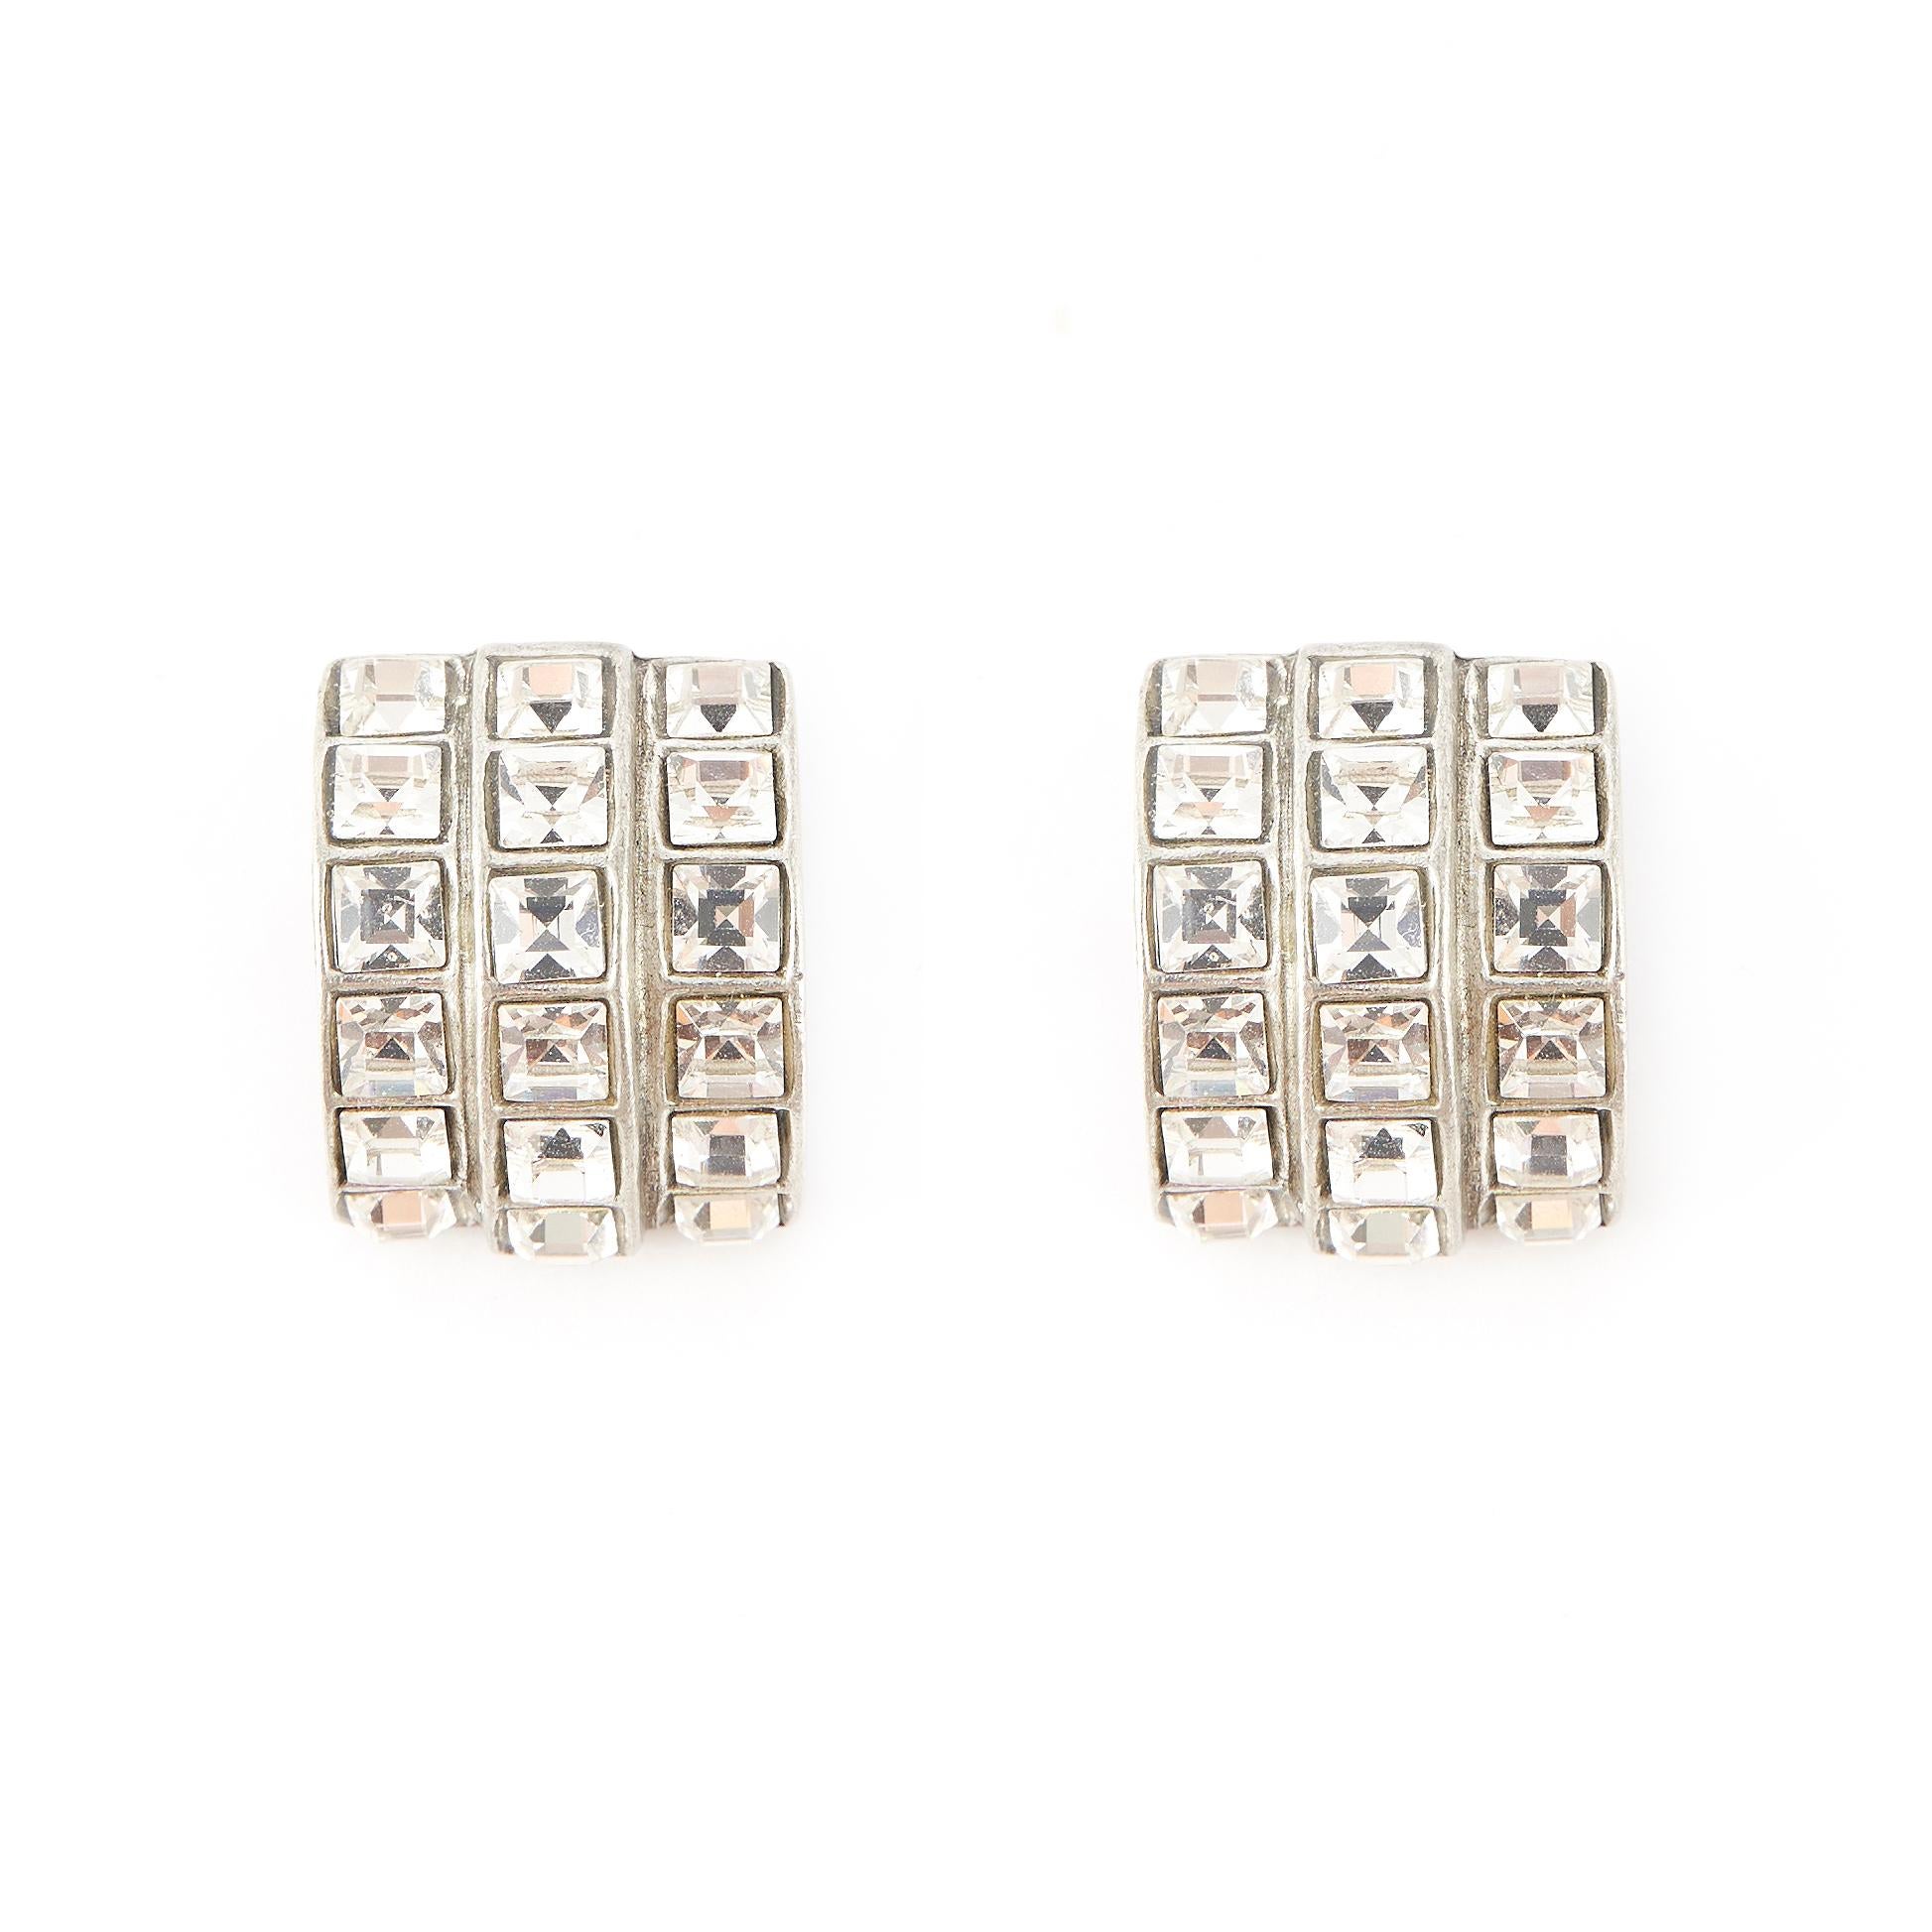 Metal: Silver-tone Metal
Genuine Clear Crystal Stones
Clip-On Earrings
Made in New York City, USA